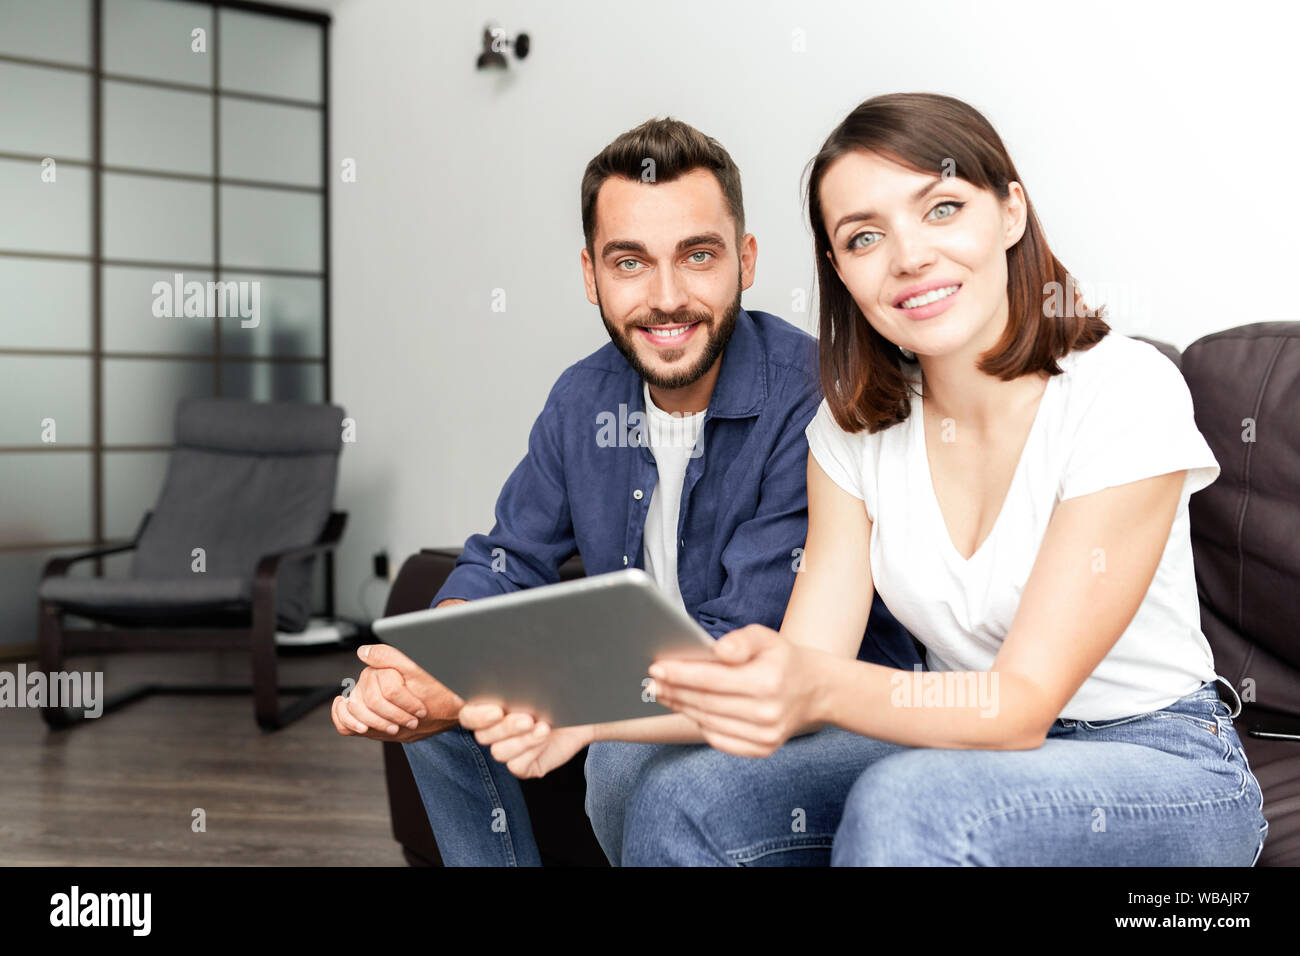 Positive couple using wifi at home Stock Photo